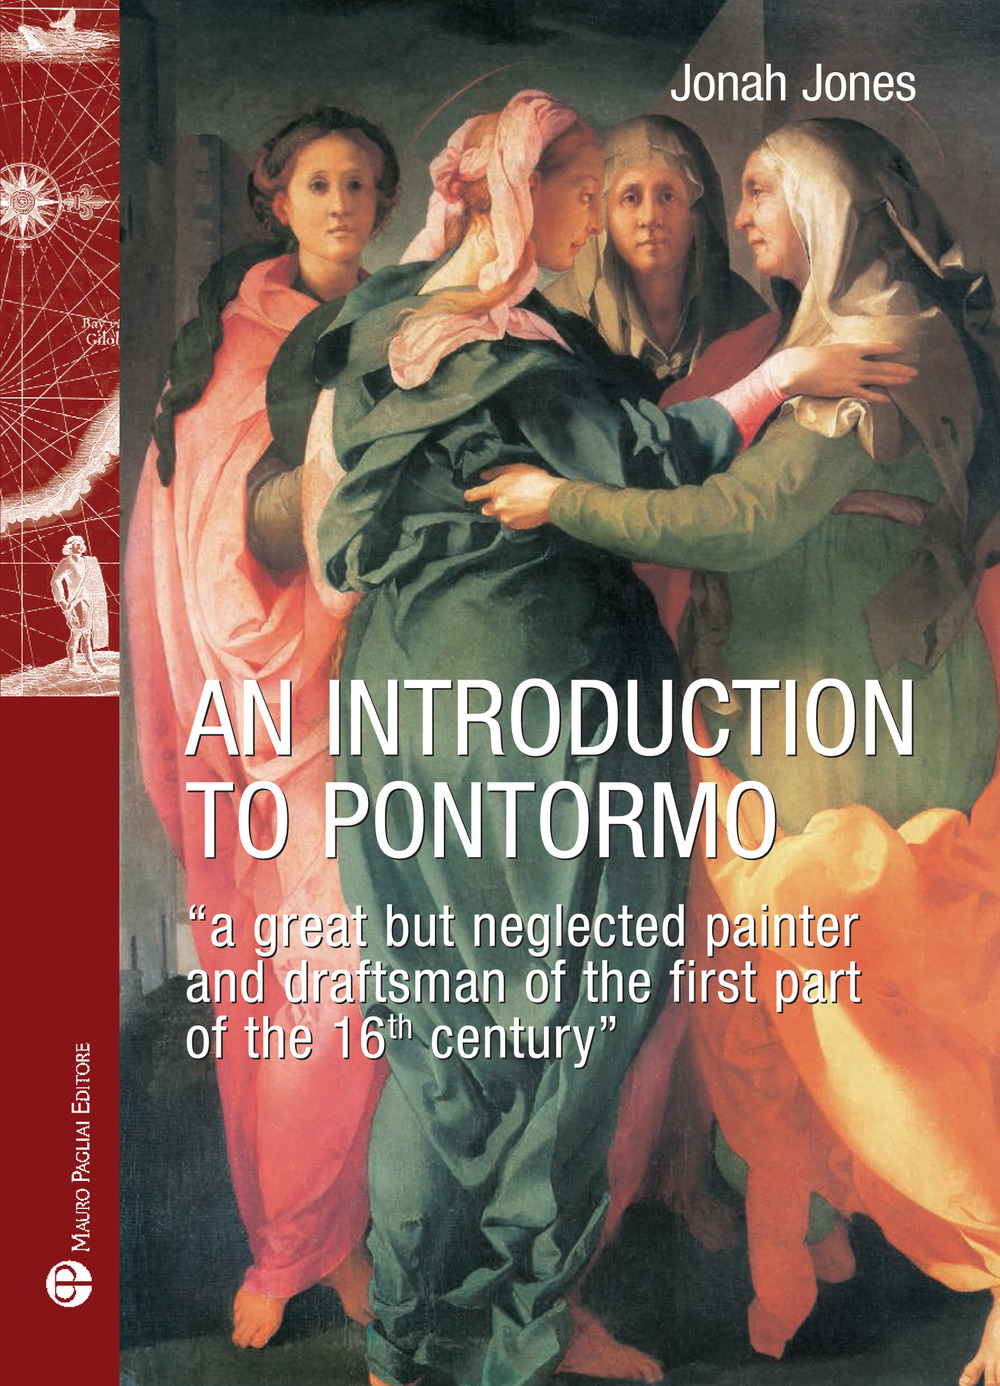 Libri Jonah Jones - An Introduction To Pontormo. A Great But Neglected Painter And Draftsman Of The First Part Of The 16Th Century NUOVO SIGILLATO, EDIZIONE DEL 07/12/2017 SUBITO DISPONIBILE